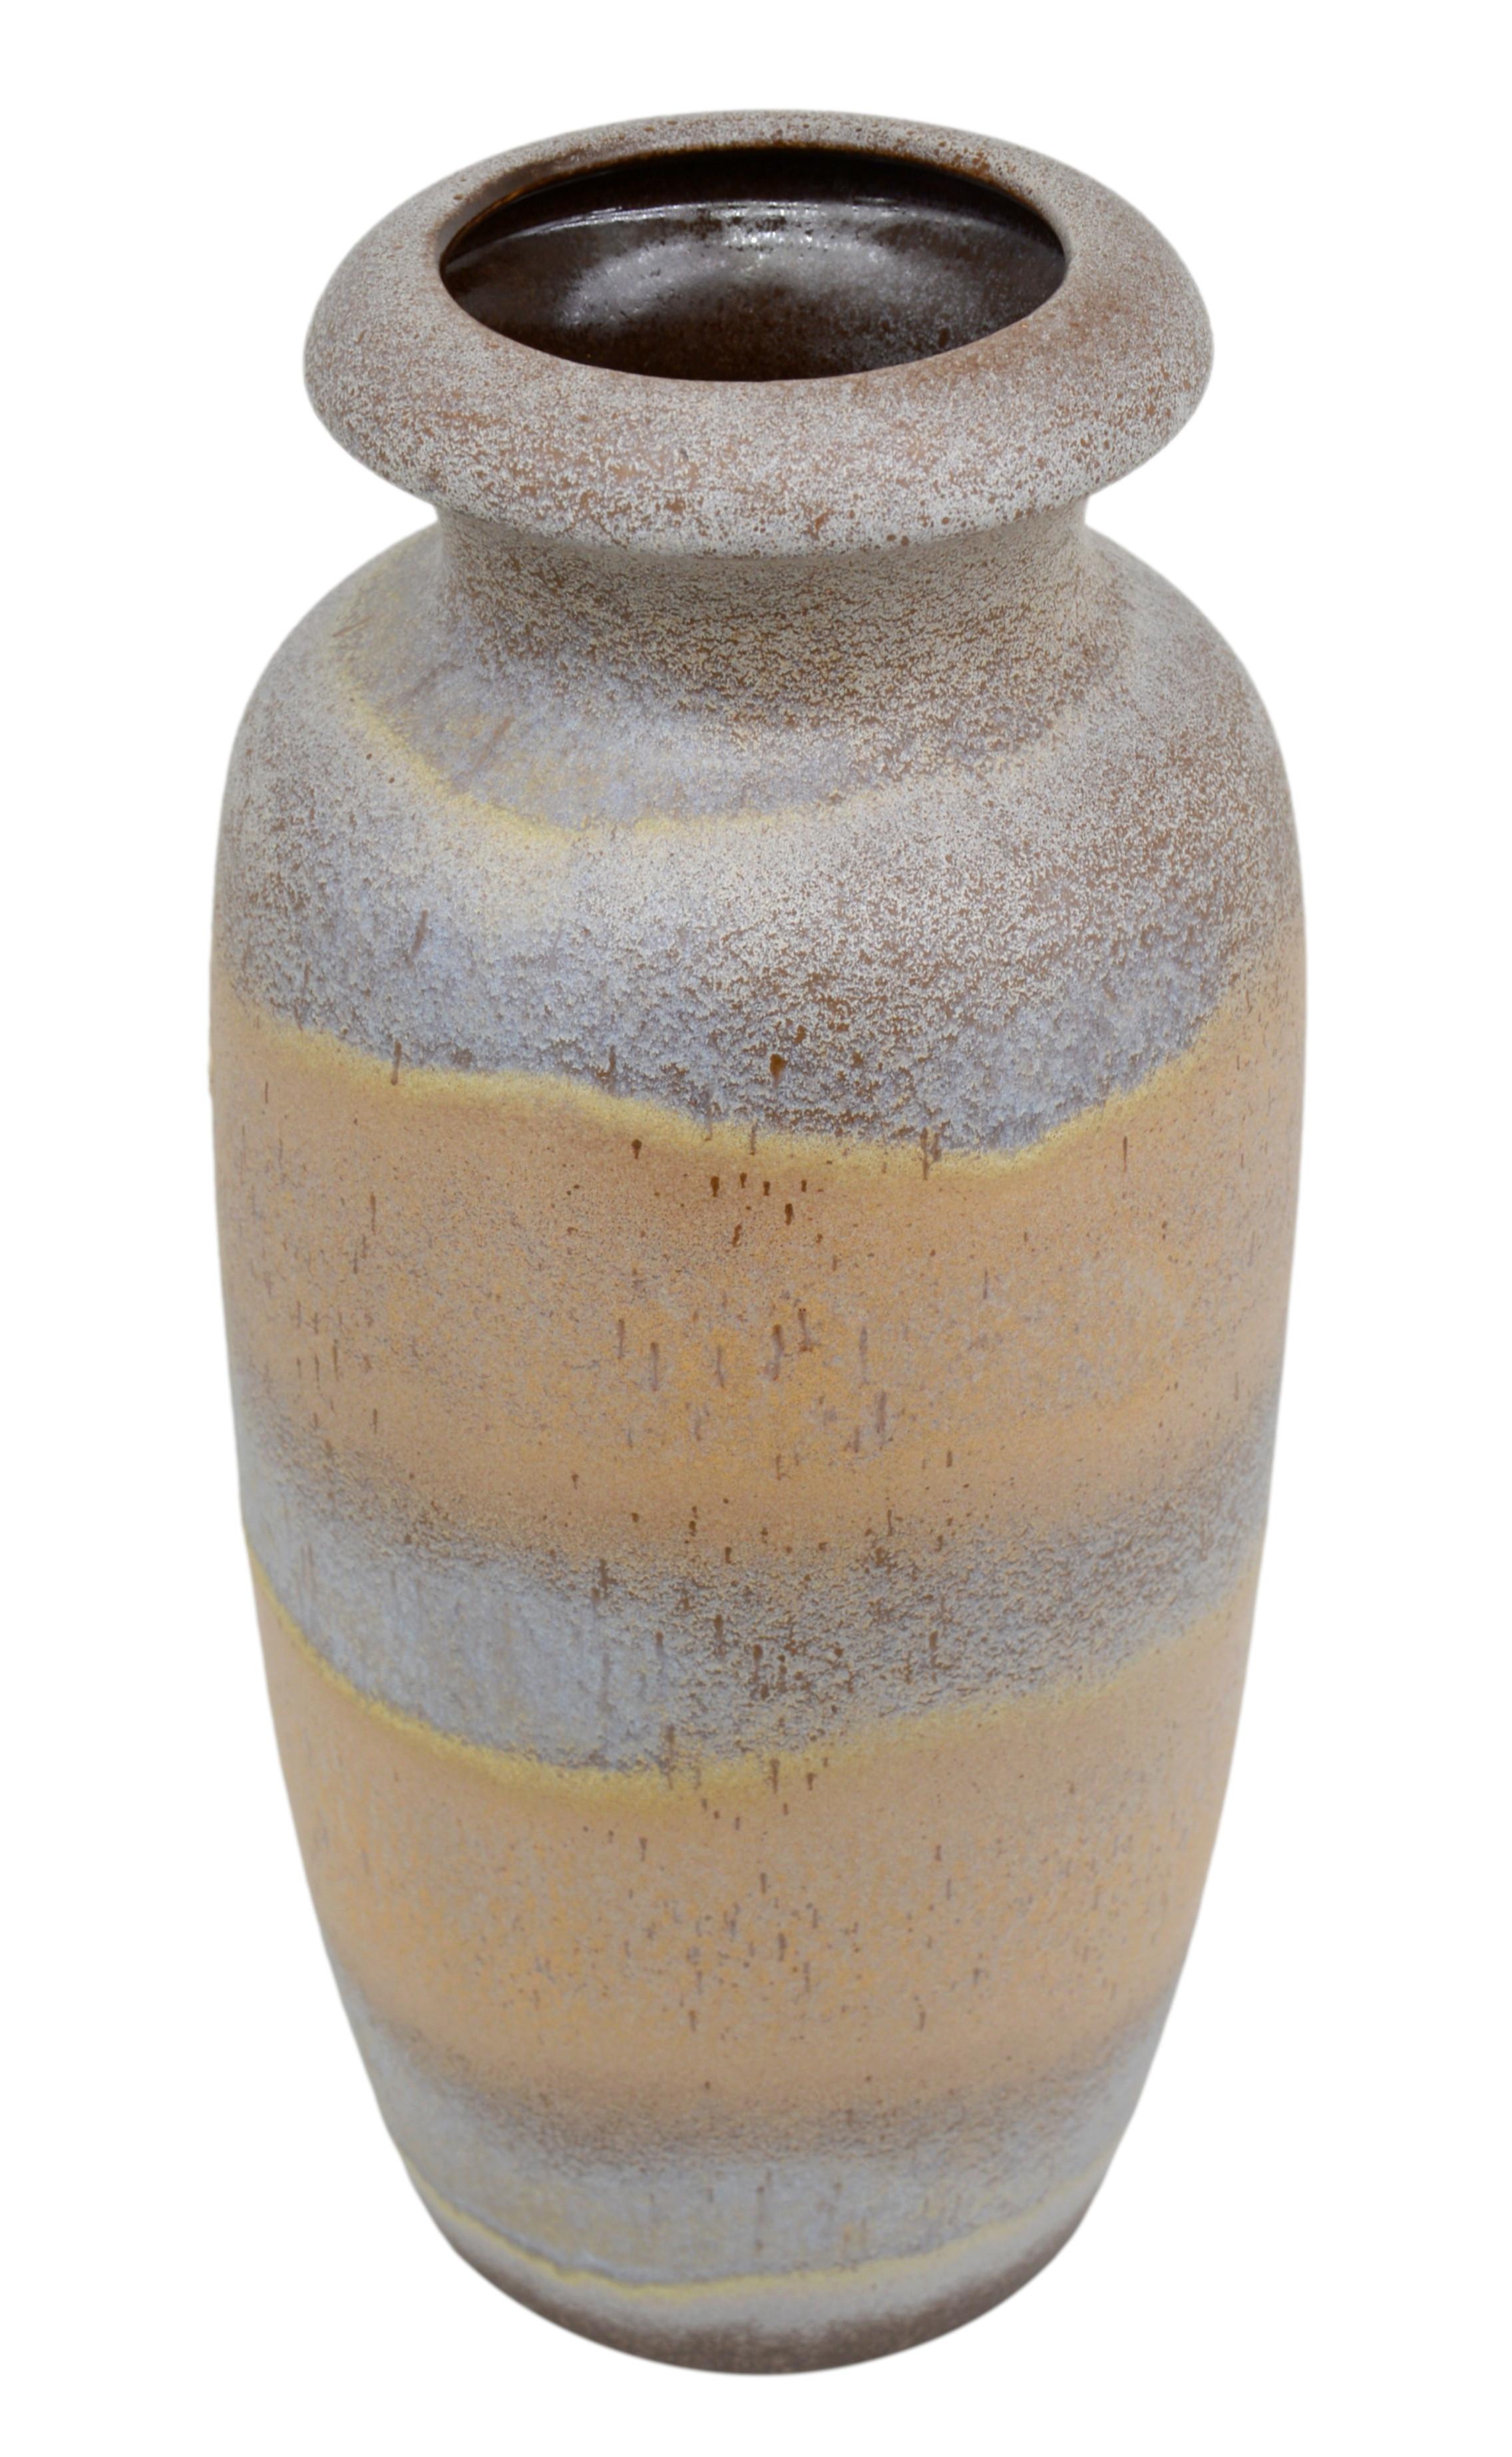 German Mid-century ceramic vase, Germany, 1960s. Measures: Height: 45cm - 17.7 in., Diameter : 22cm - 8.7 in. Marked under the base (see photo).